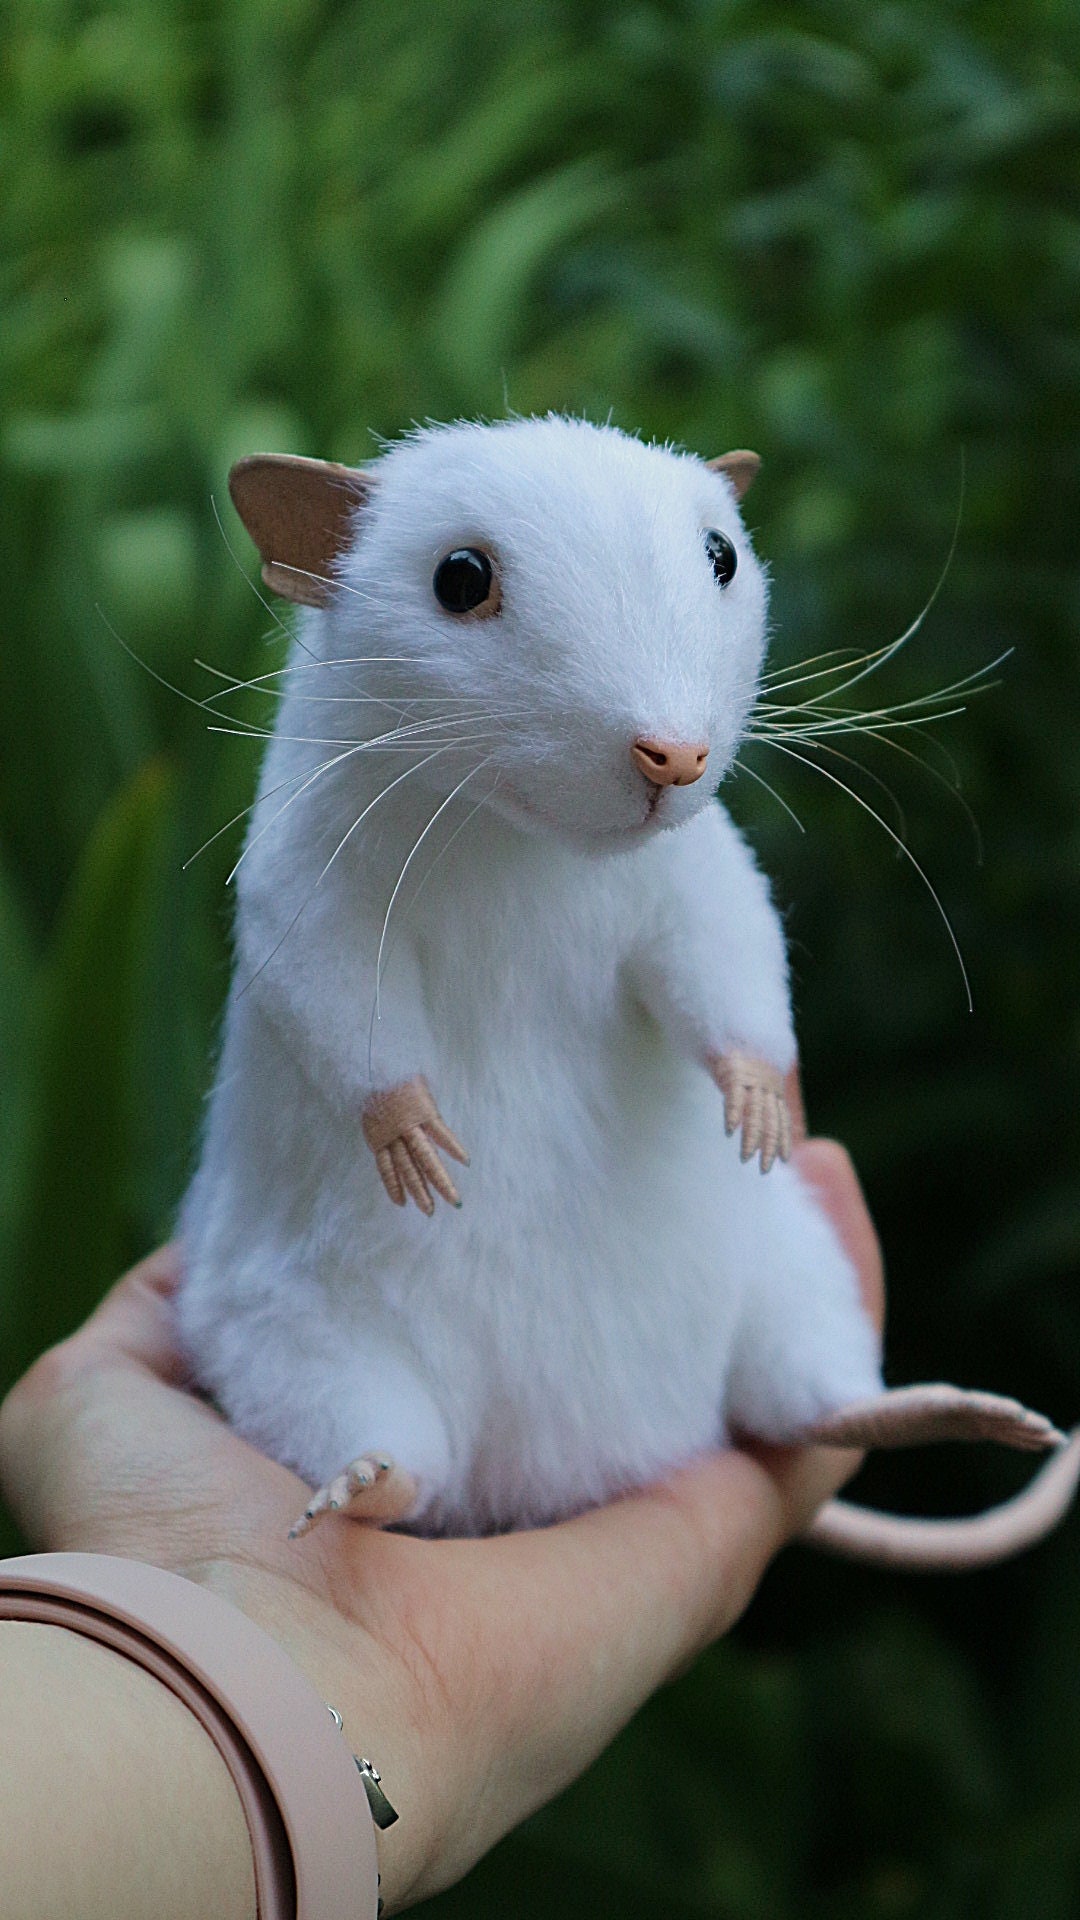 Handmade one of a kind Polymerclay white rat sculpture by Mystic